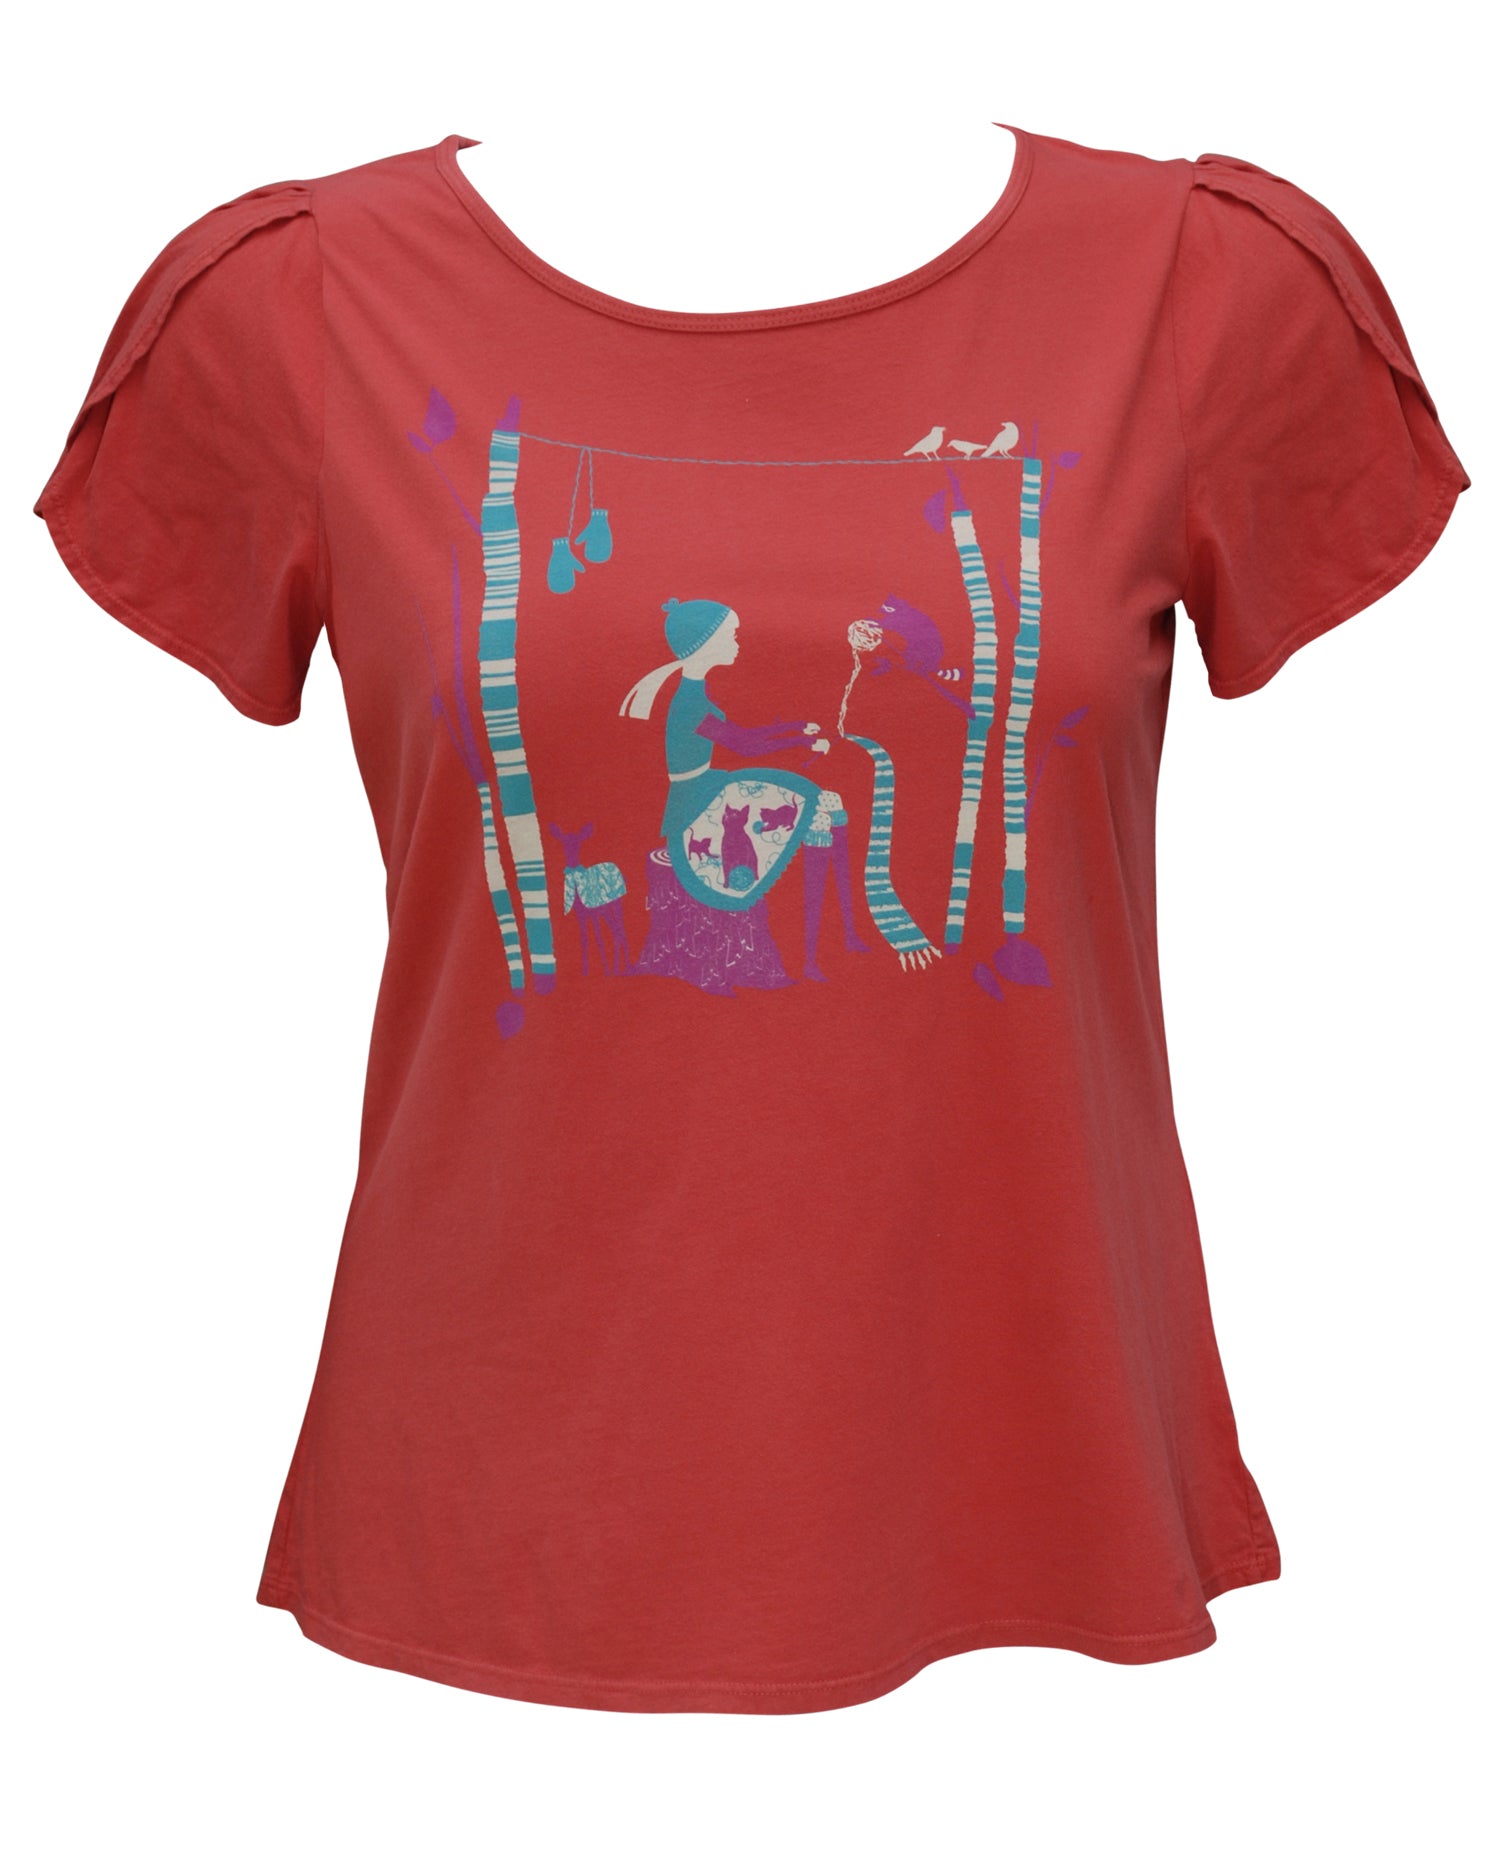 Red t-shirt with knitting girl graphic